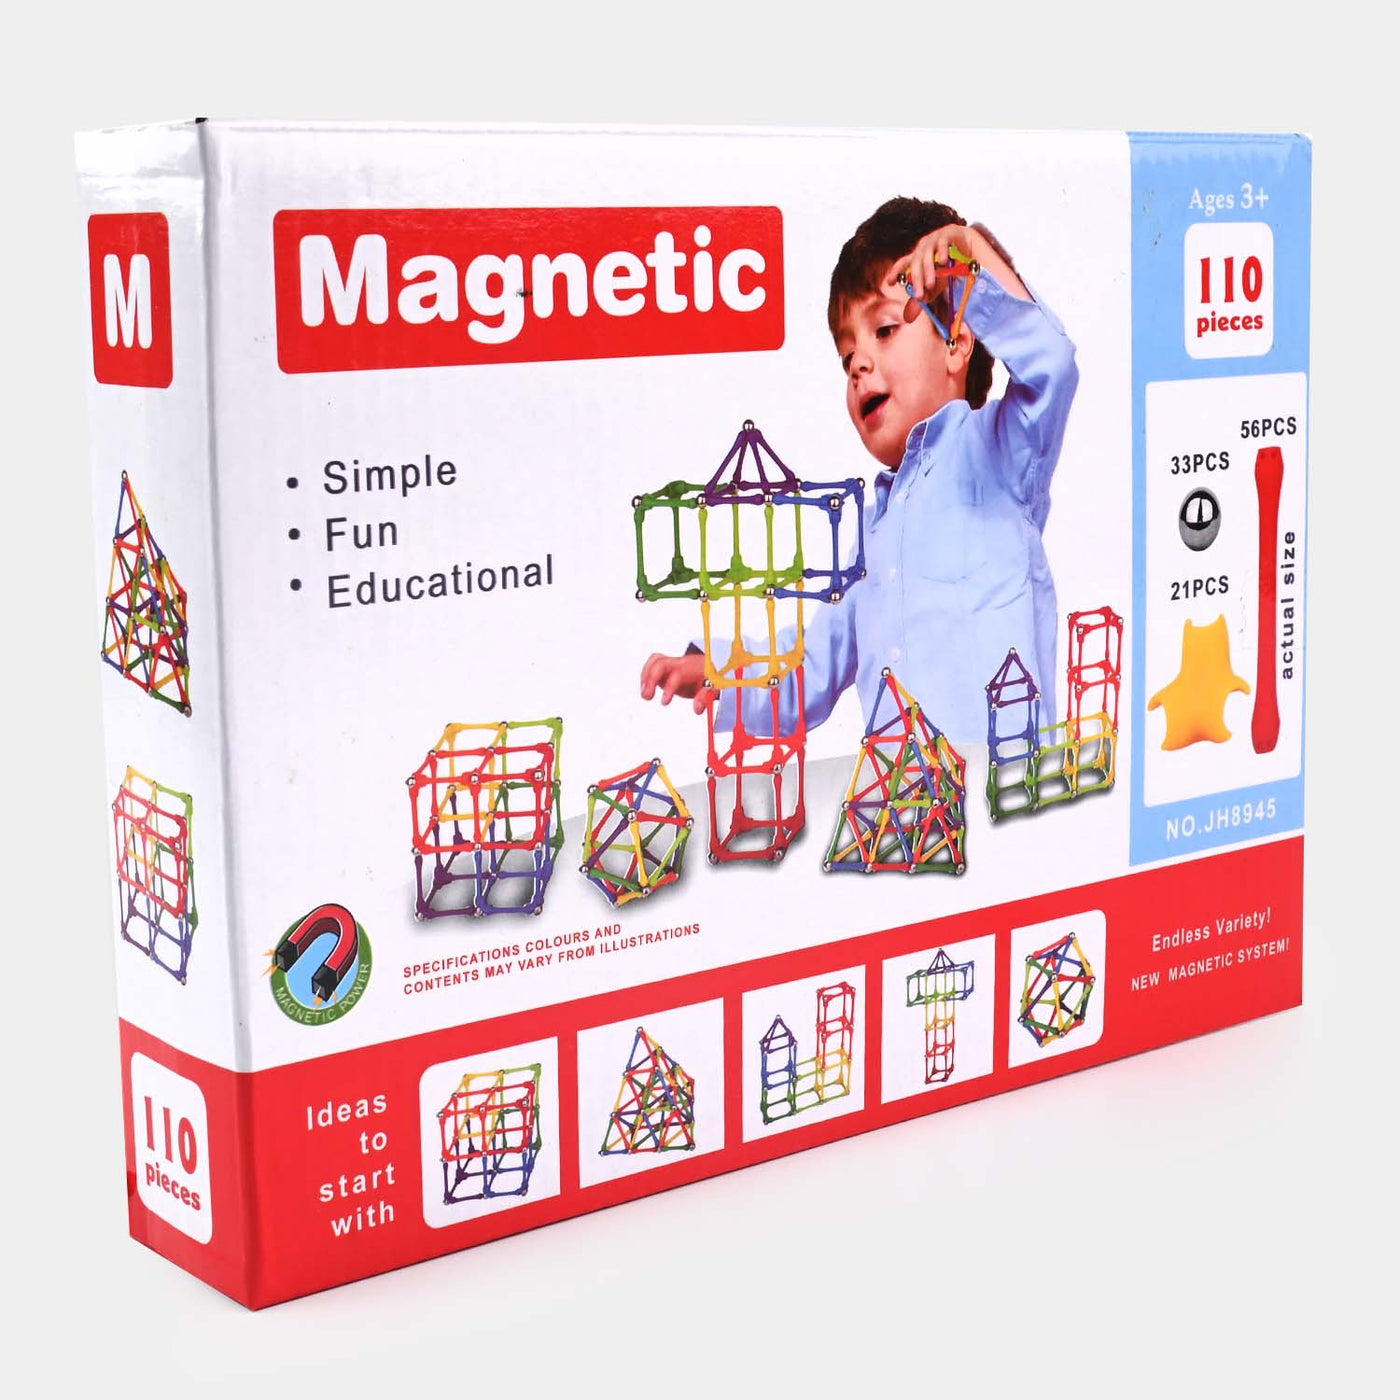 Magnetic Sticks in Endless Variety New Magnetic System- Magnetic Blocks 110 Pieces